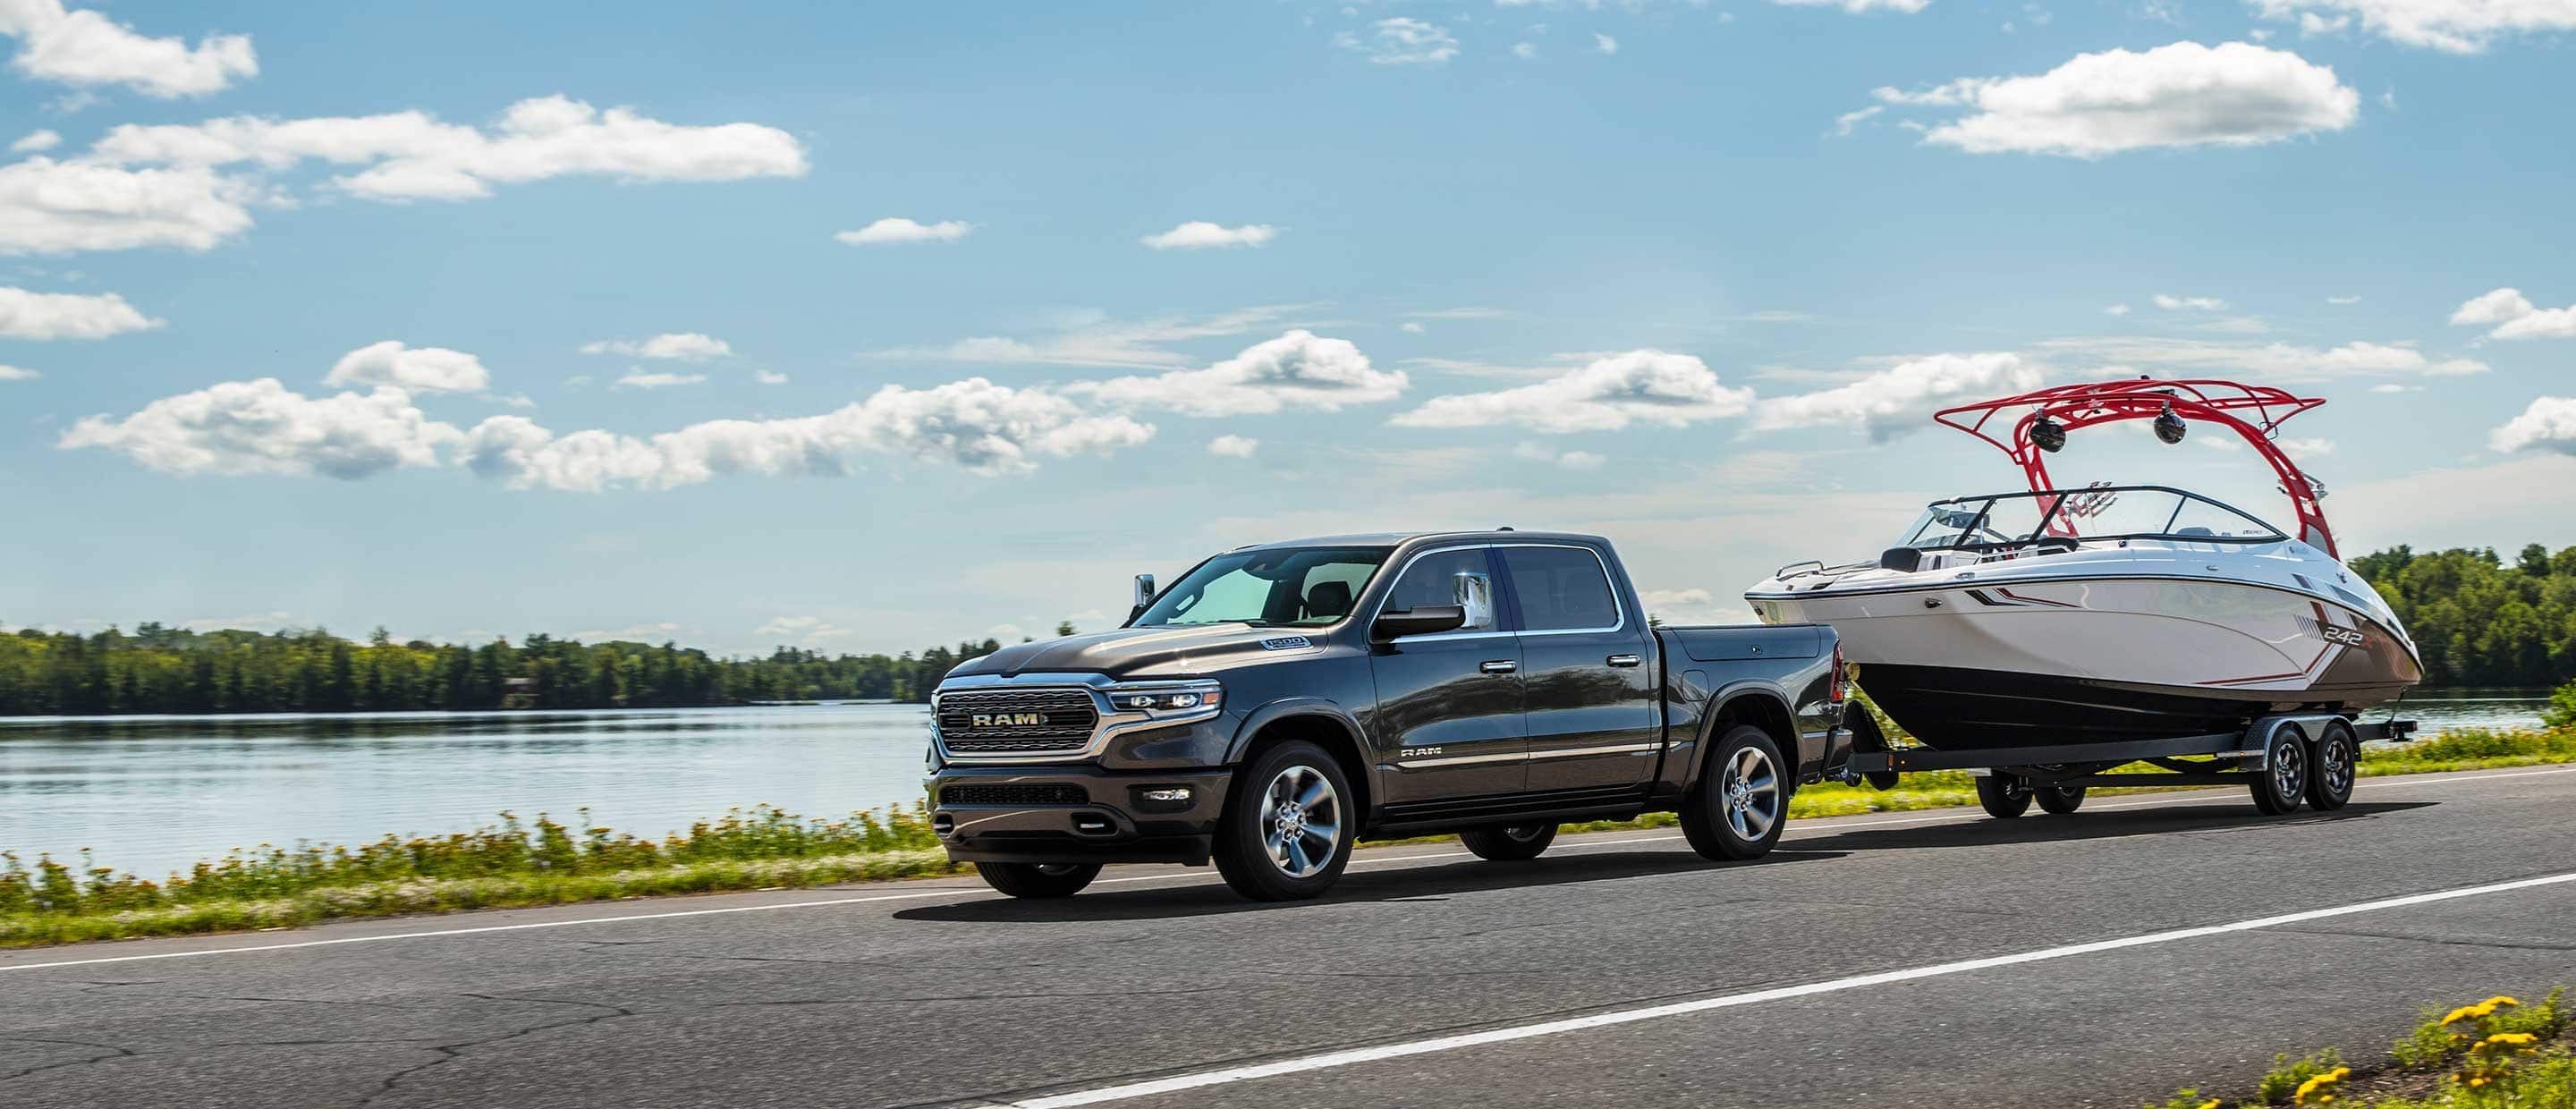 The 2022 Ram 1500 towing a boat as it's driven past a lake.